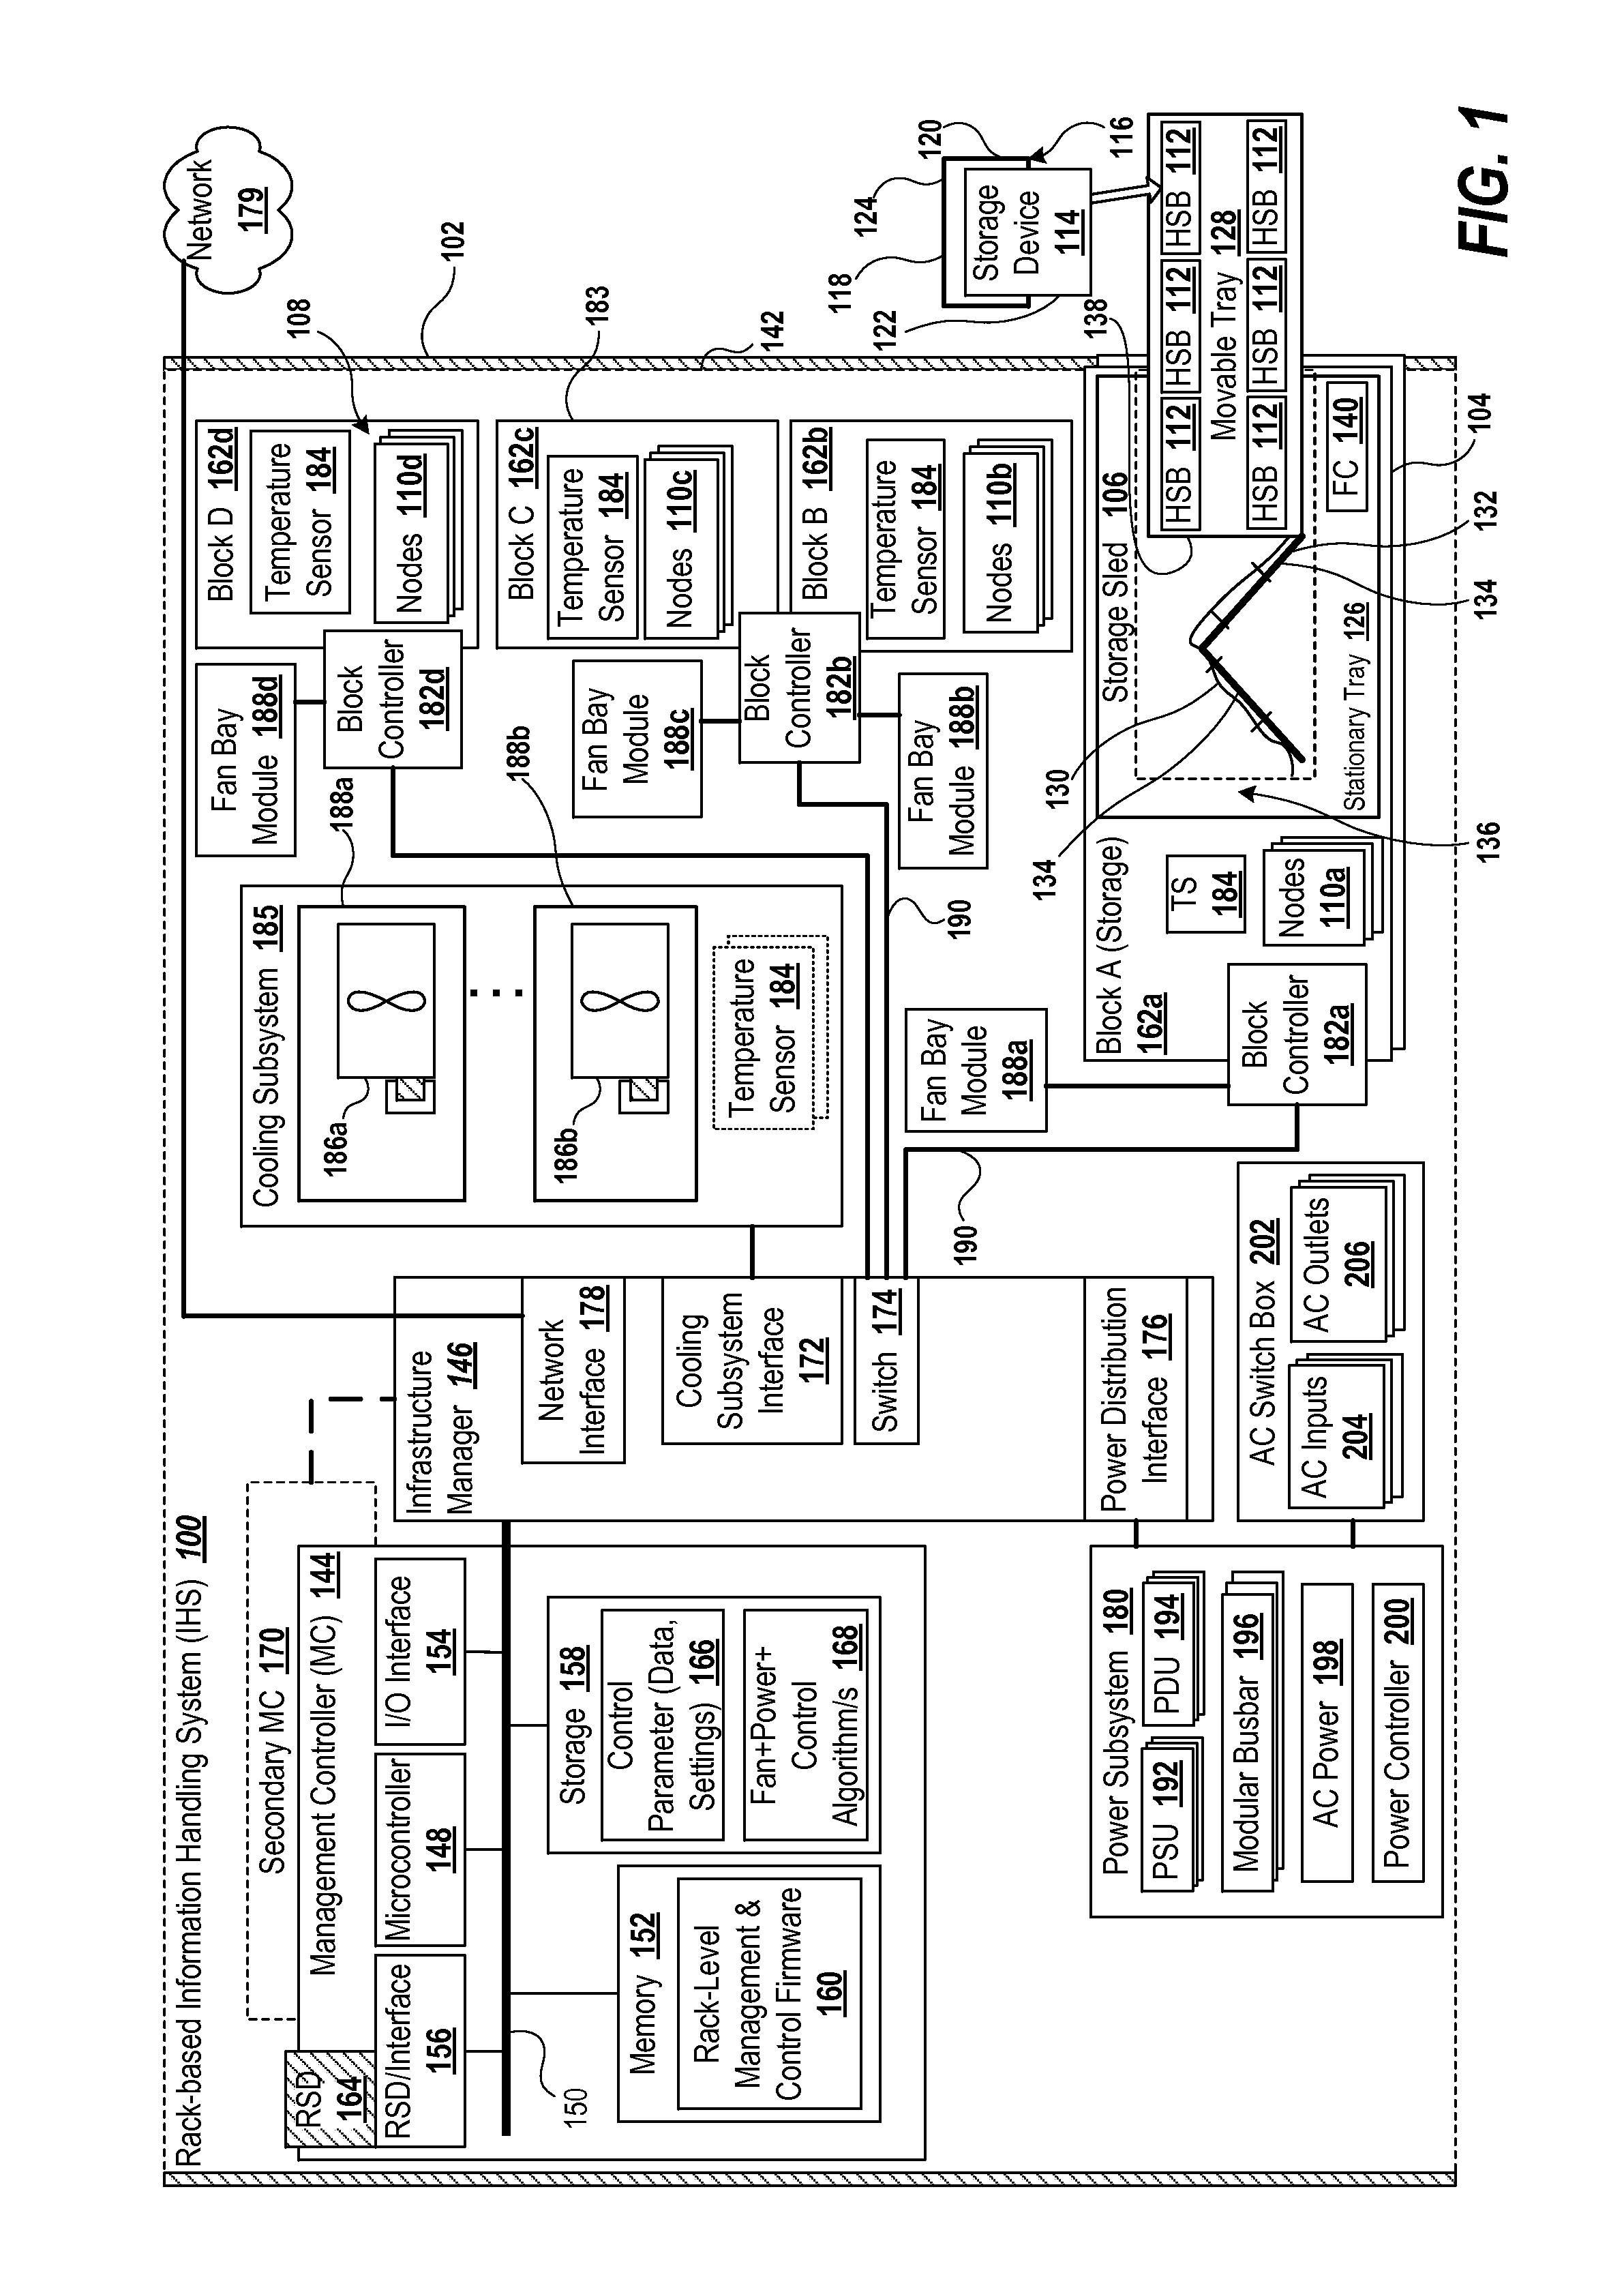 Single unit height storage sled with lateral storage device assembly supporting hot-removal of storage devices and slidable insertion and extraction from an information handling system rack